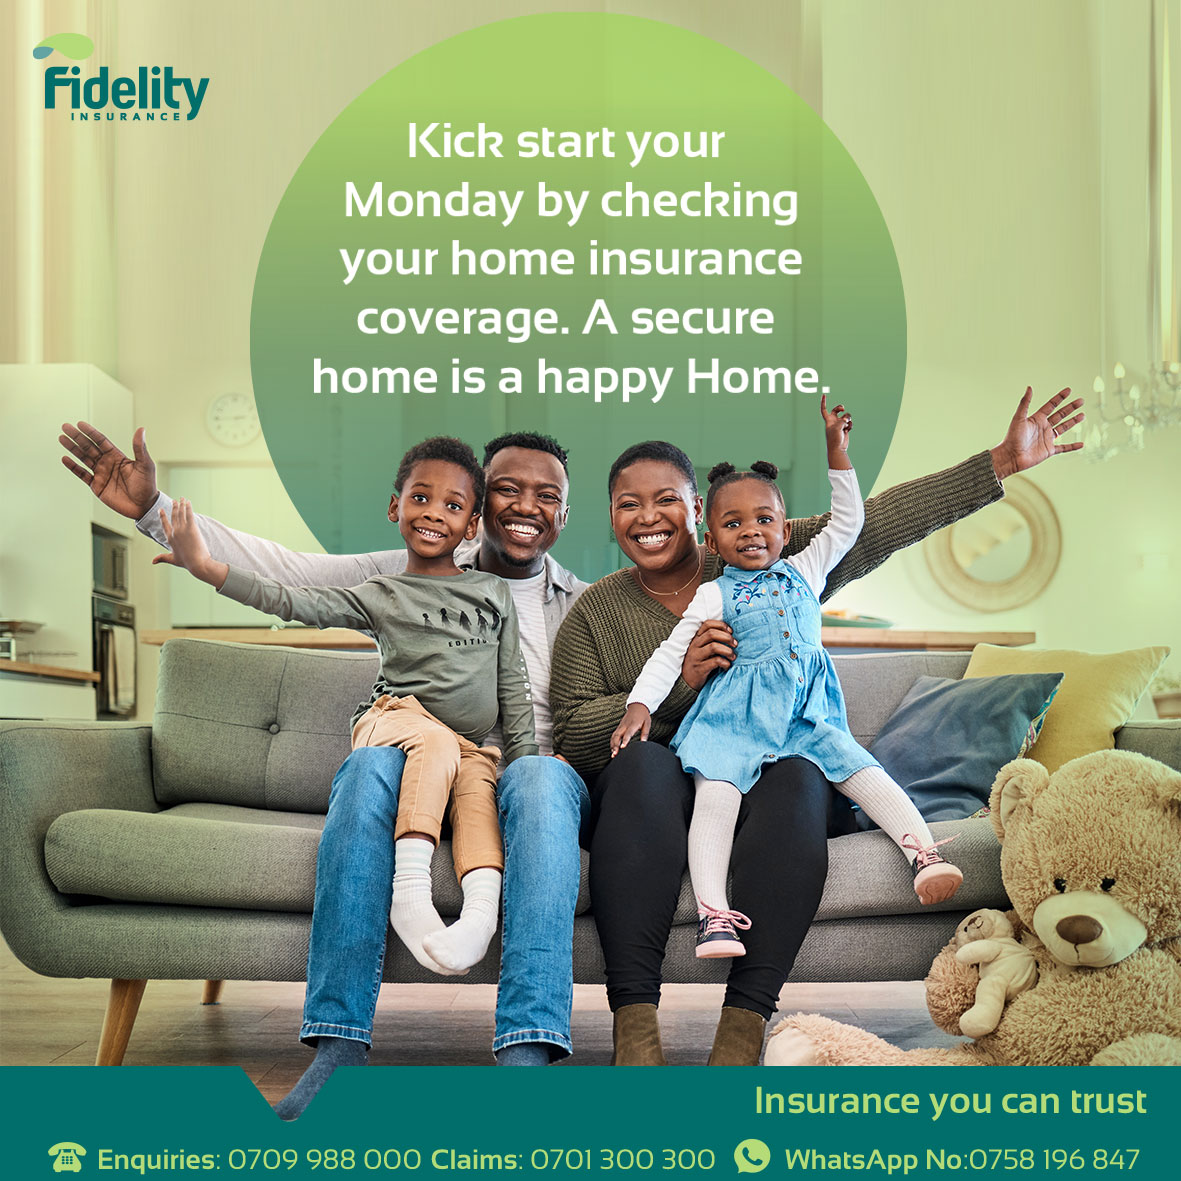 Make sure your domestic insurance package is ready to handle anything life throws your way. Call us on 0709988000 today and stay protected.
#fidelityinsurance #insuranceyoucantrust #insurance #homeinsurance #monday